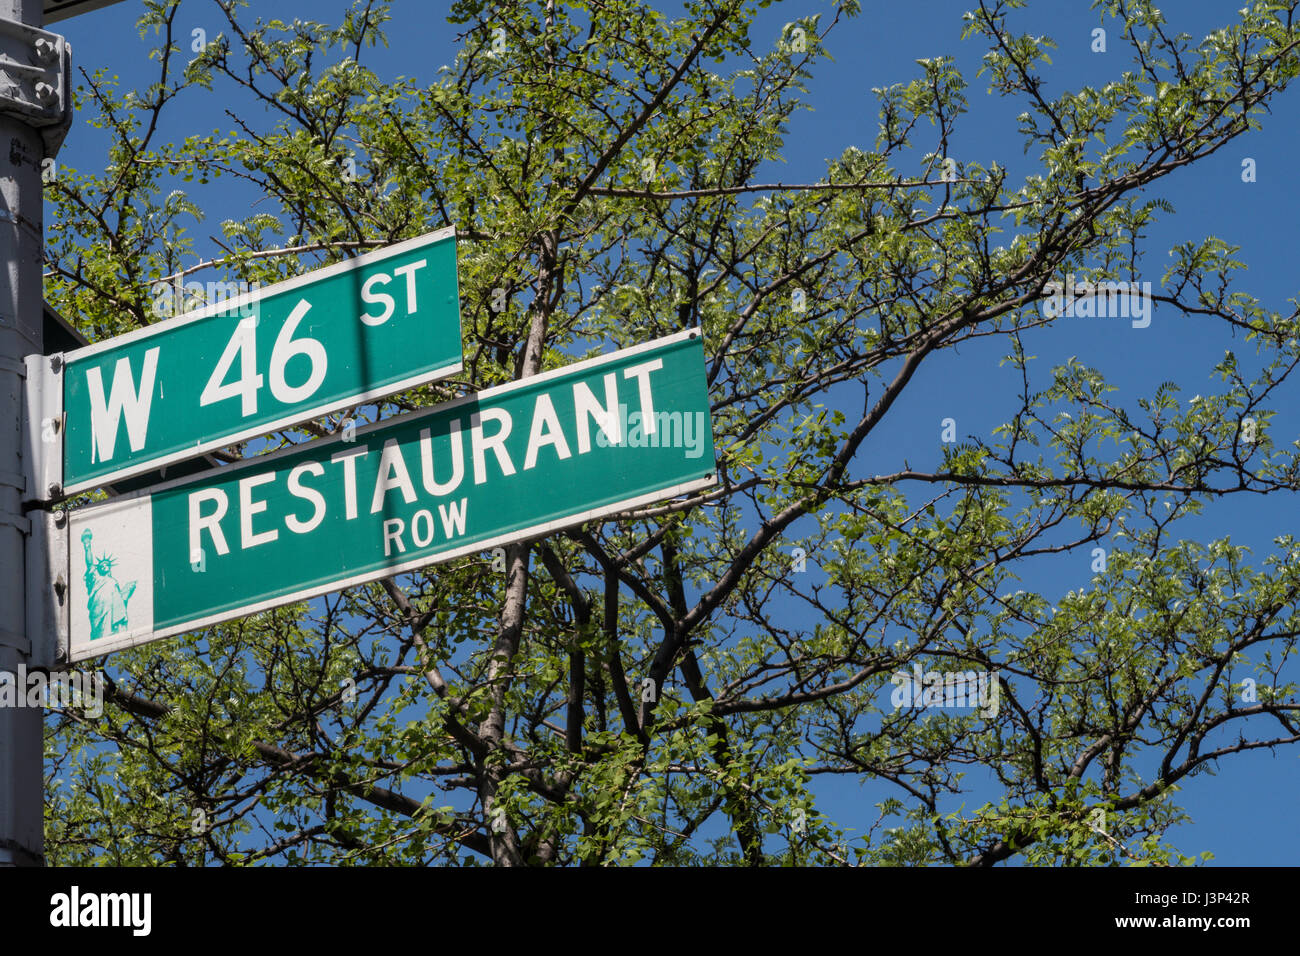 Street Signs, Restaurant Row, West 46th Street, Hell's Kitchen, NYC, USA Stock Photo